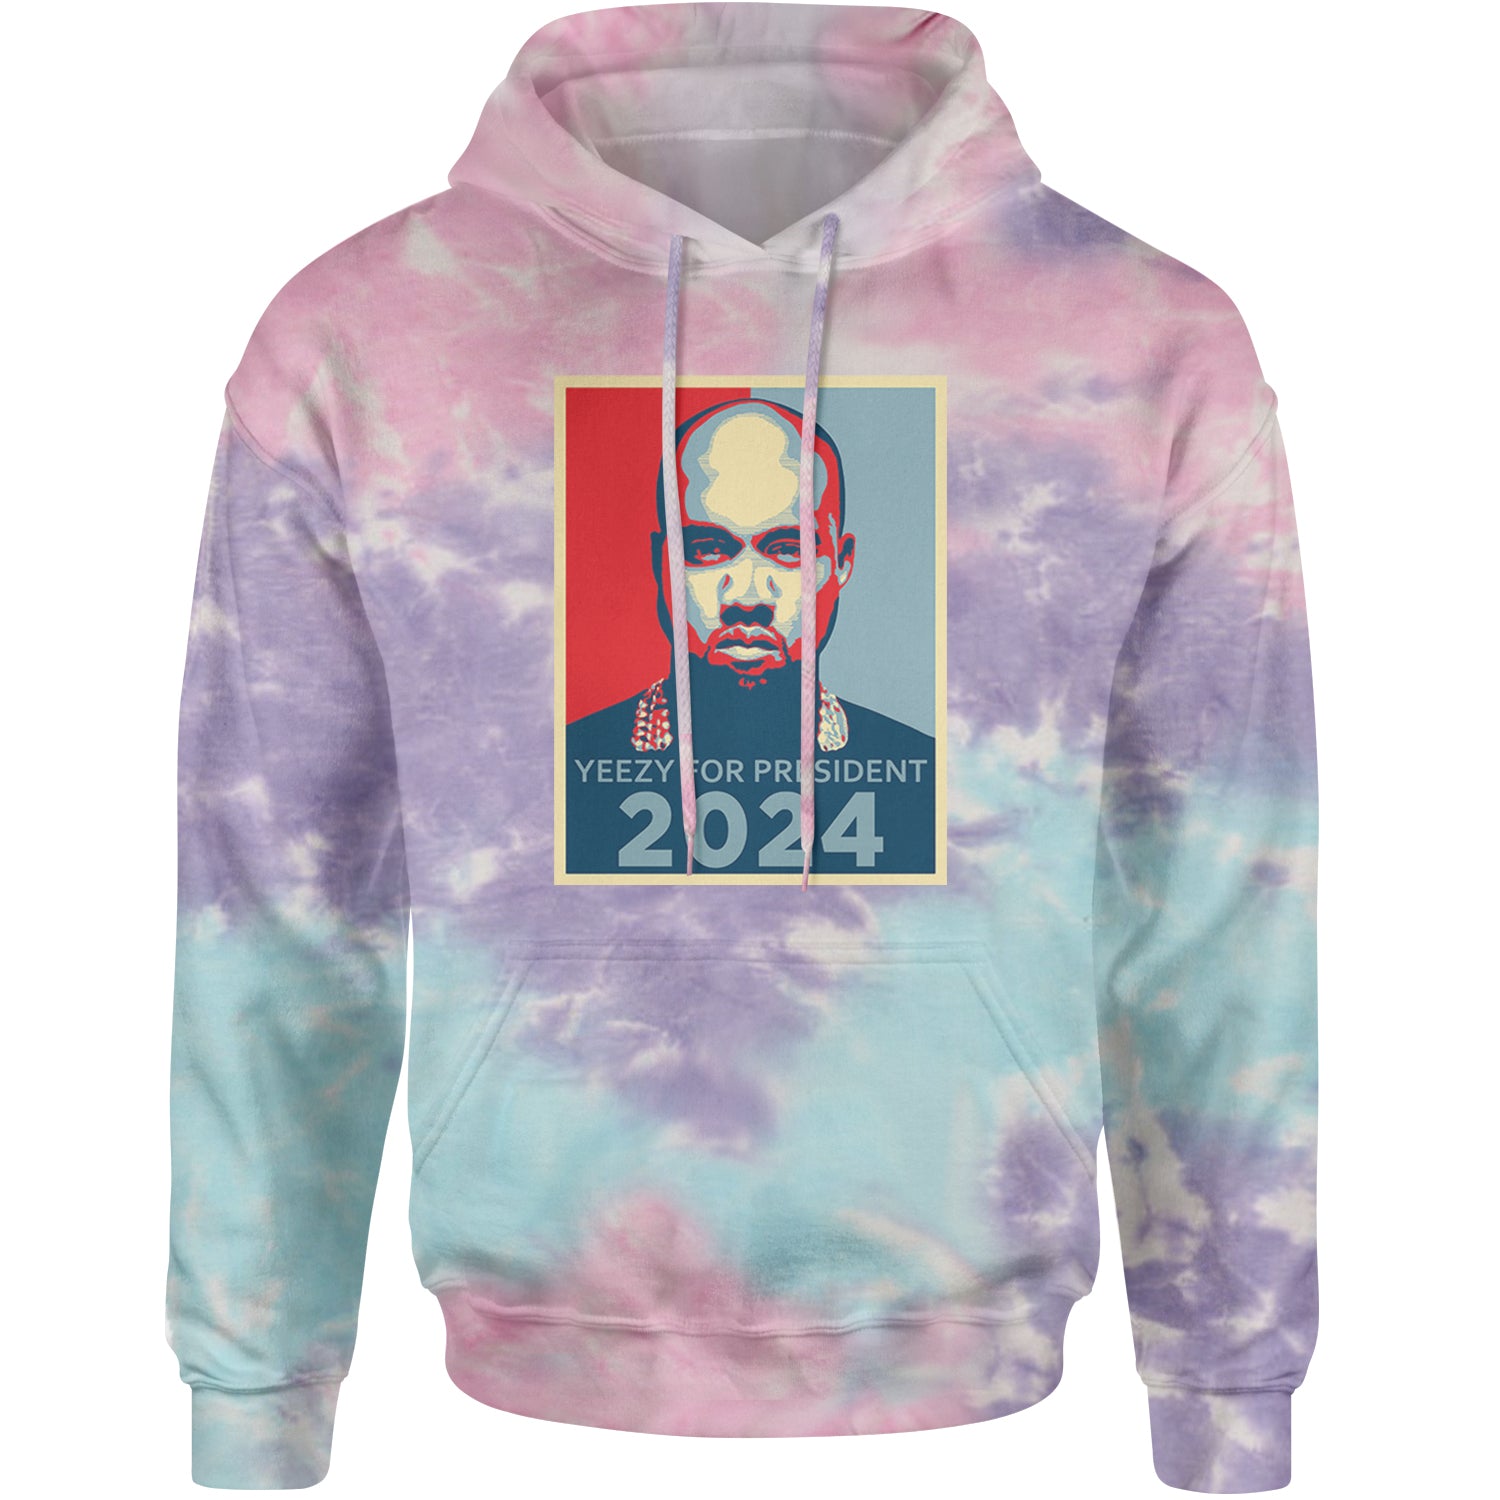 Yeezus For President Vote for Ye Adult Hoodie Sweatshirt Cotton Candy